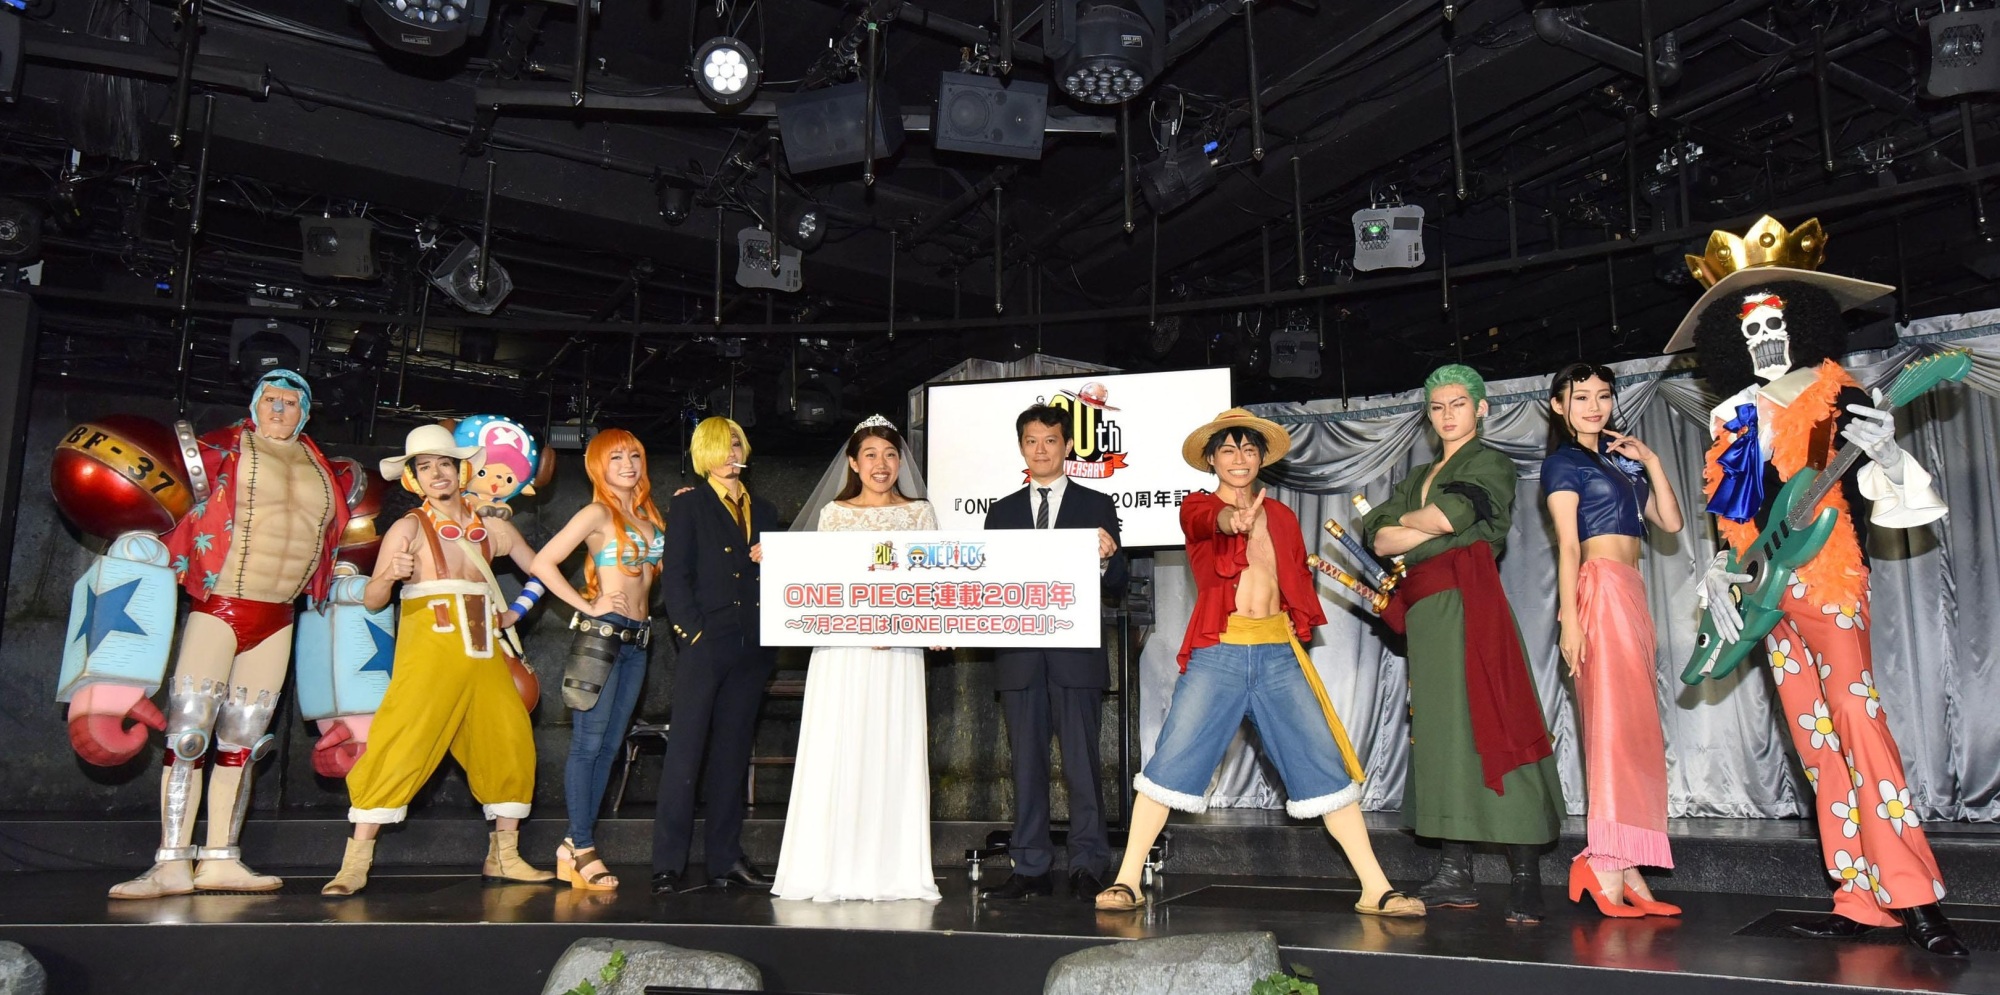 Popular manga 'One Piece' to be remade into liveaction TV drama  The